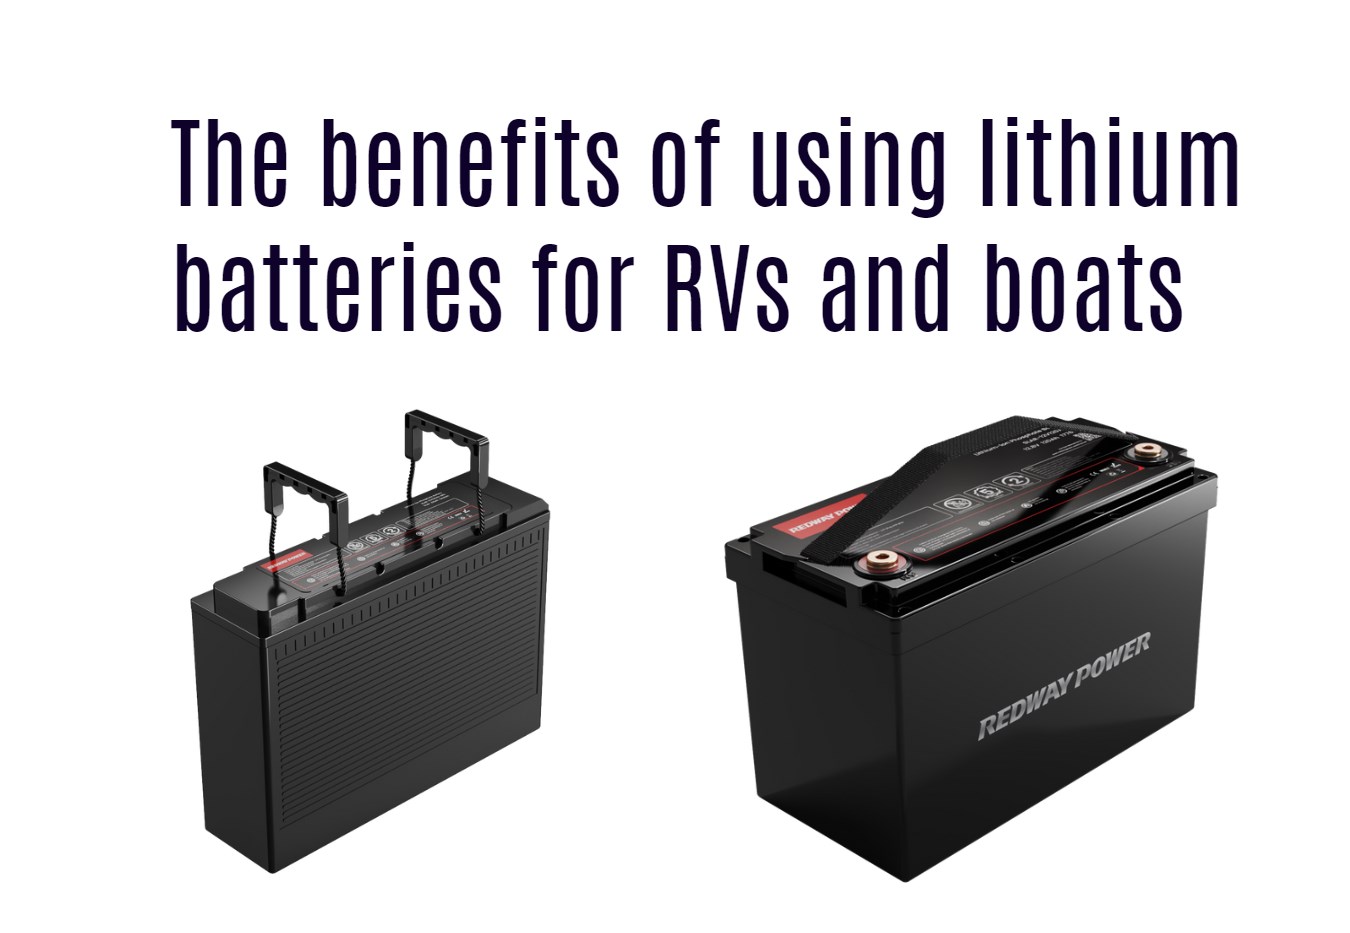 The benefits of using lithium batteries for RVs and boats. 12v 100ah lifepo4 rv battery factory redway